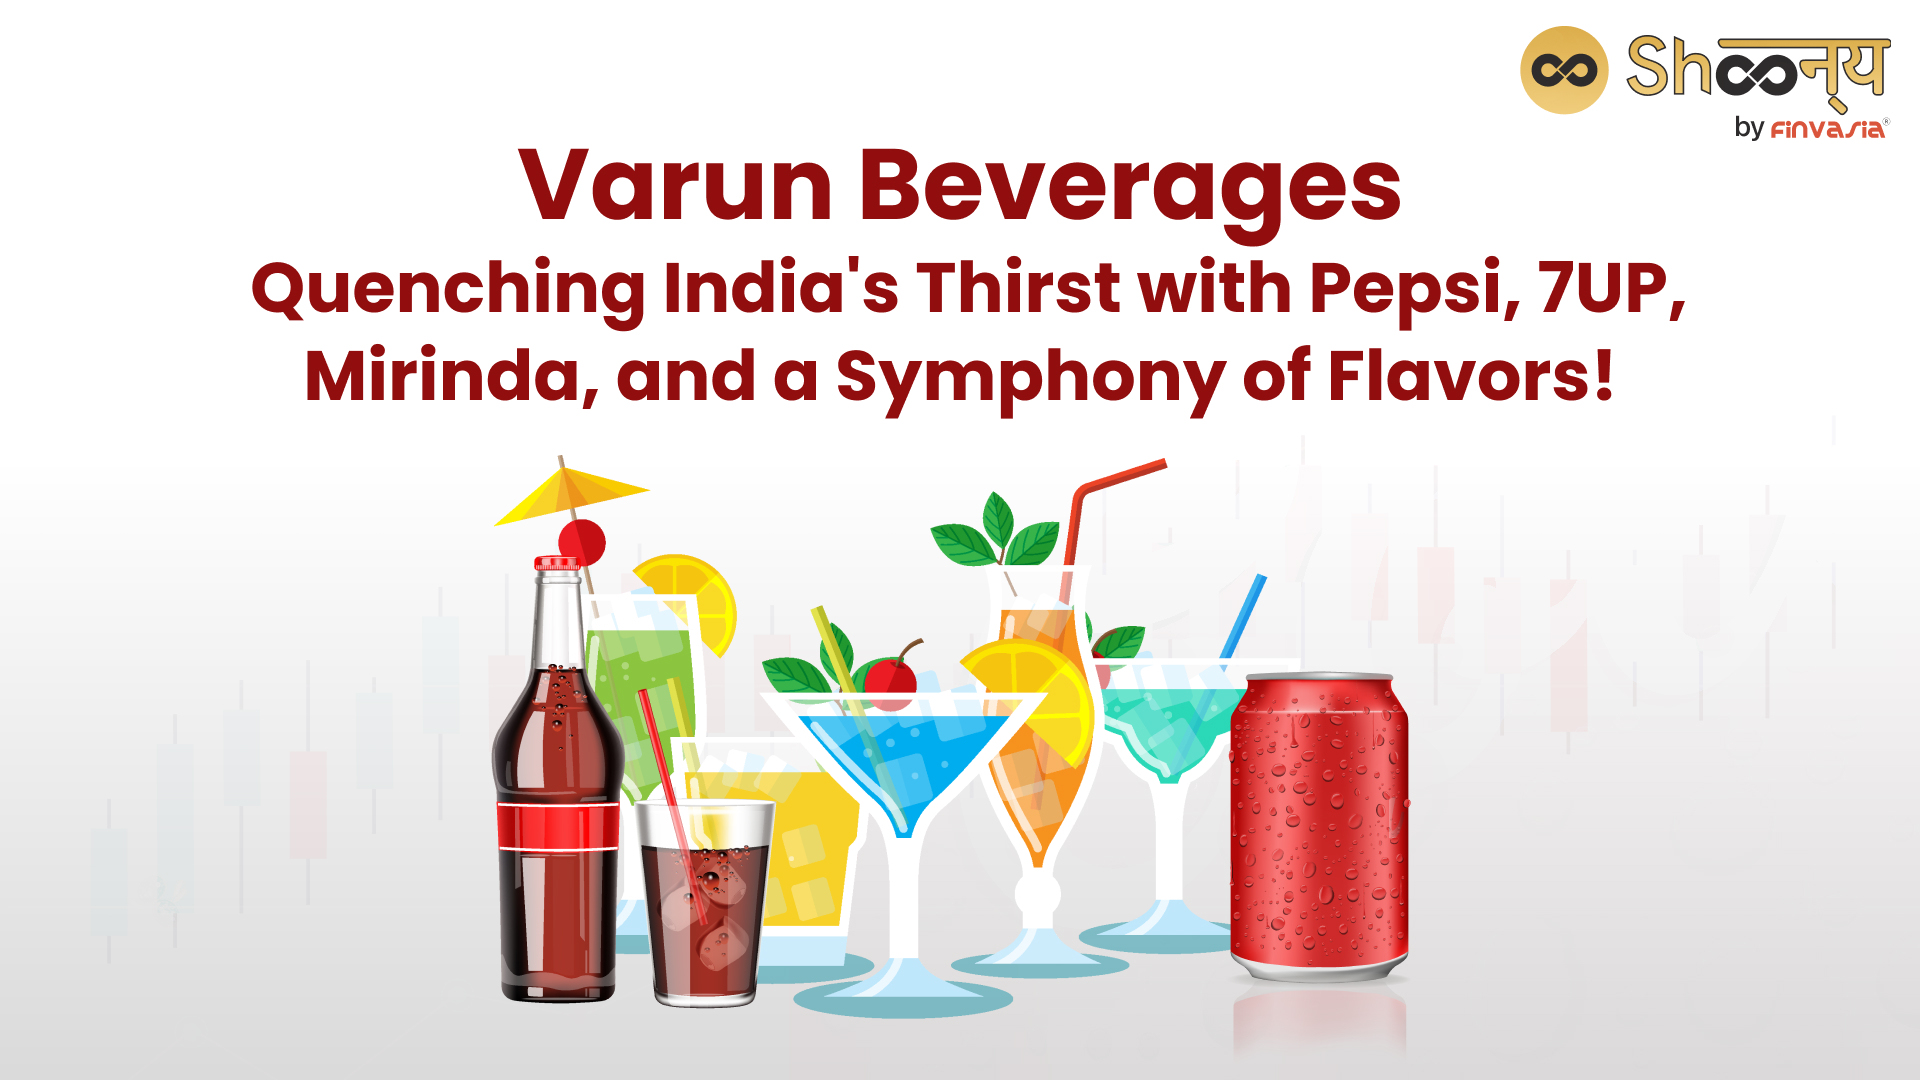 Varun Beverages: Quenching India's Thirst with Pepsi, 7UP, Mirinda, and a Symphony of Flavors